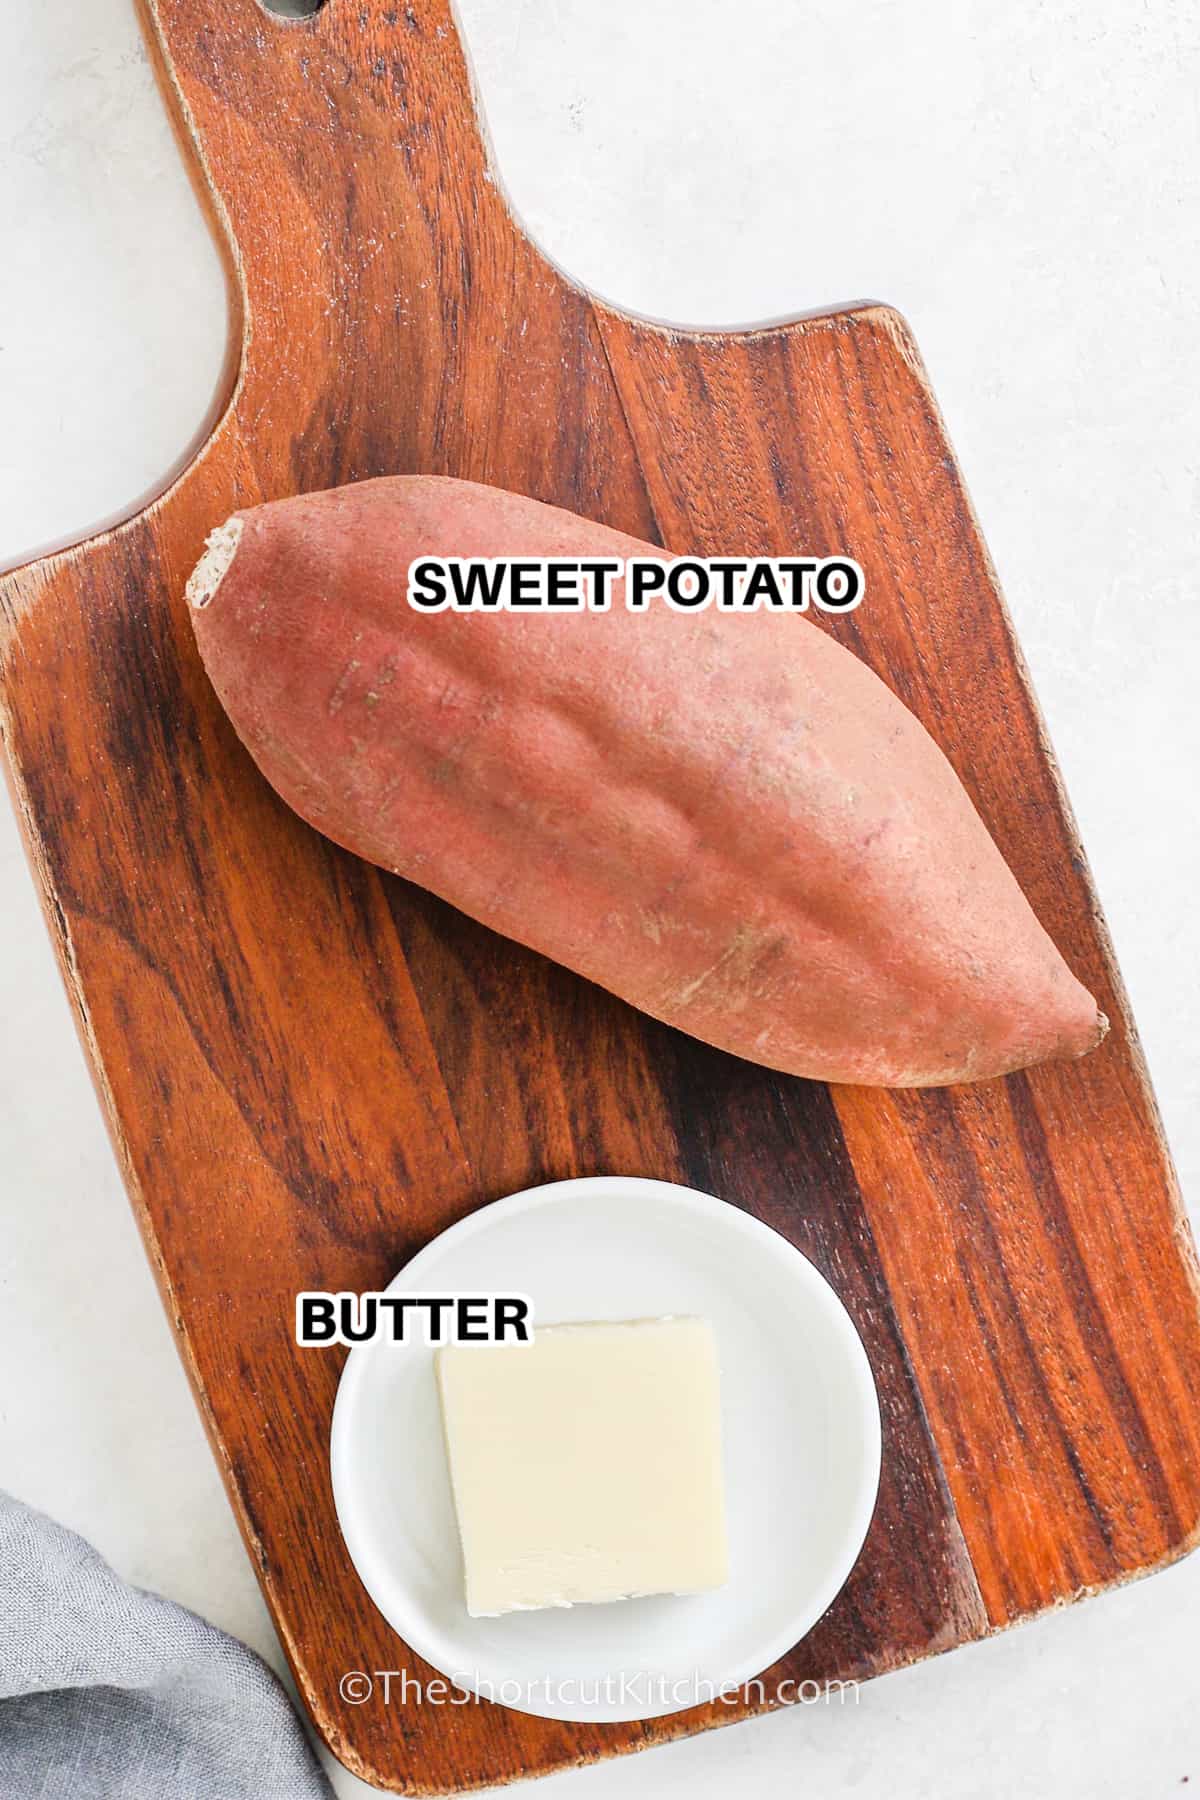 ingredients to make microwave sweet potatoes including sweet potatoes and butter